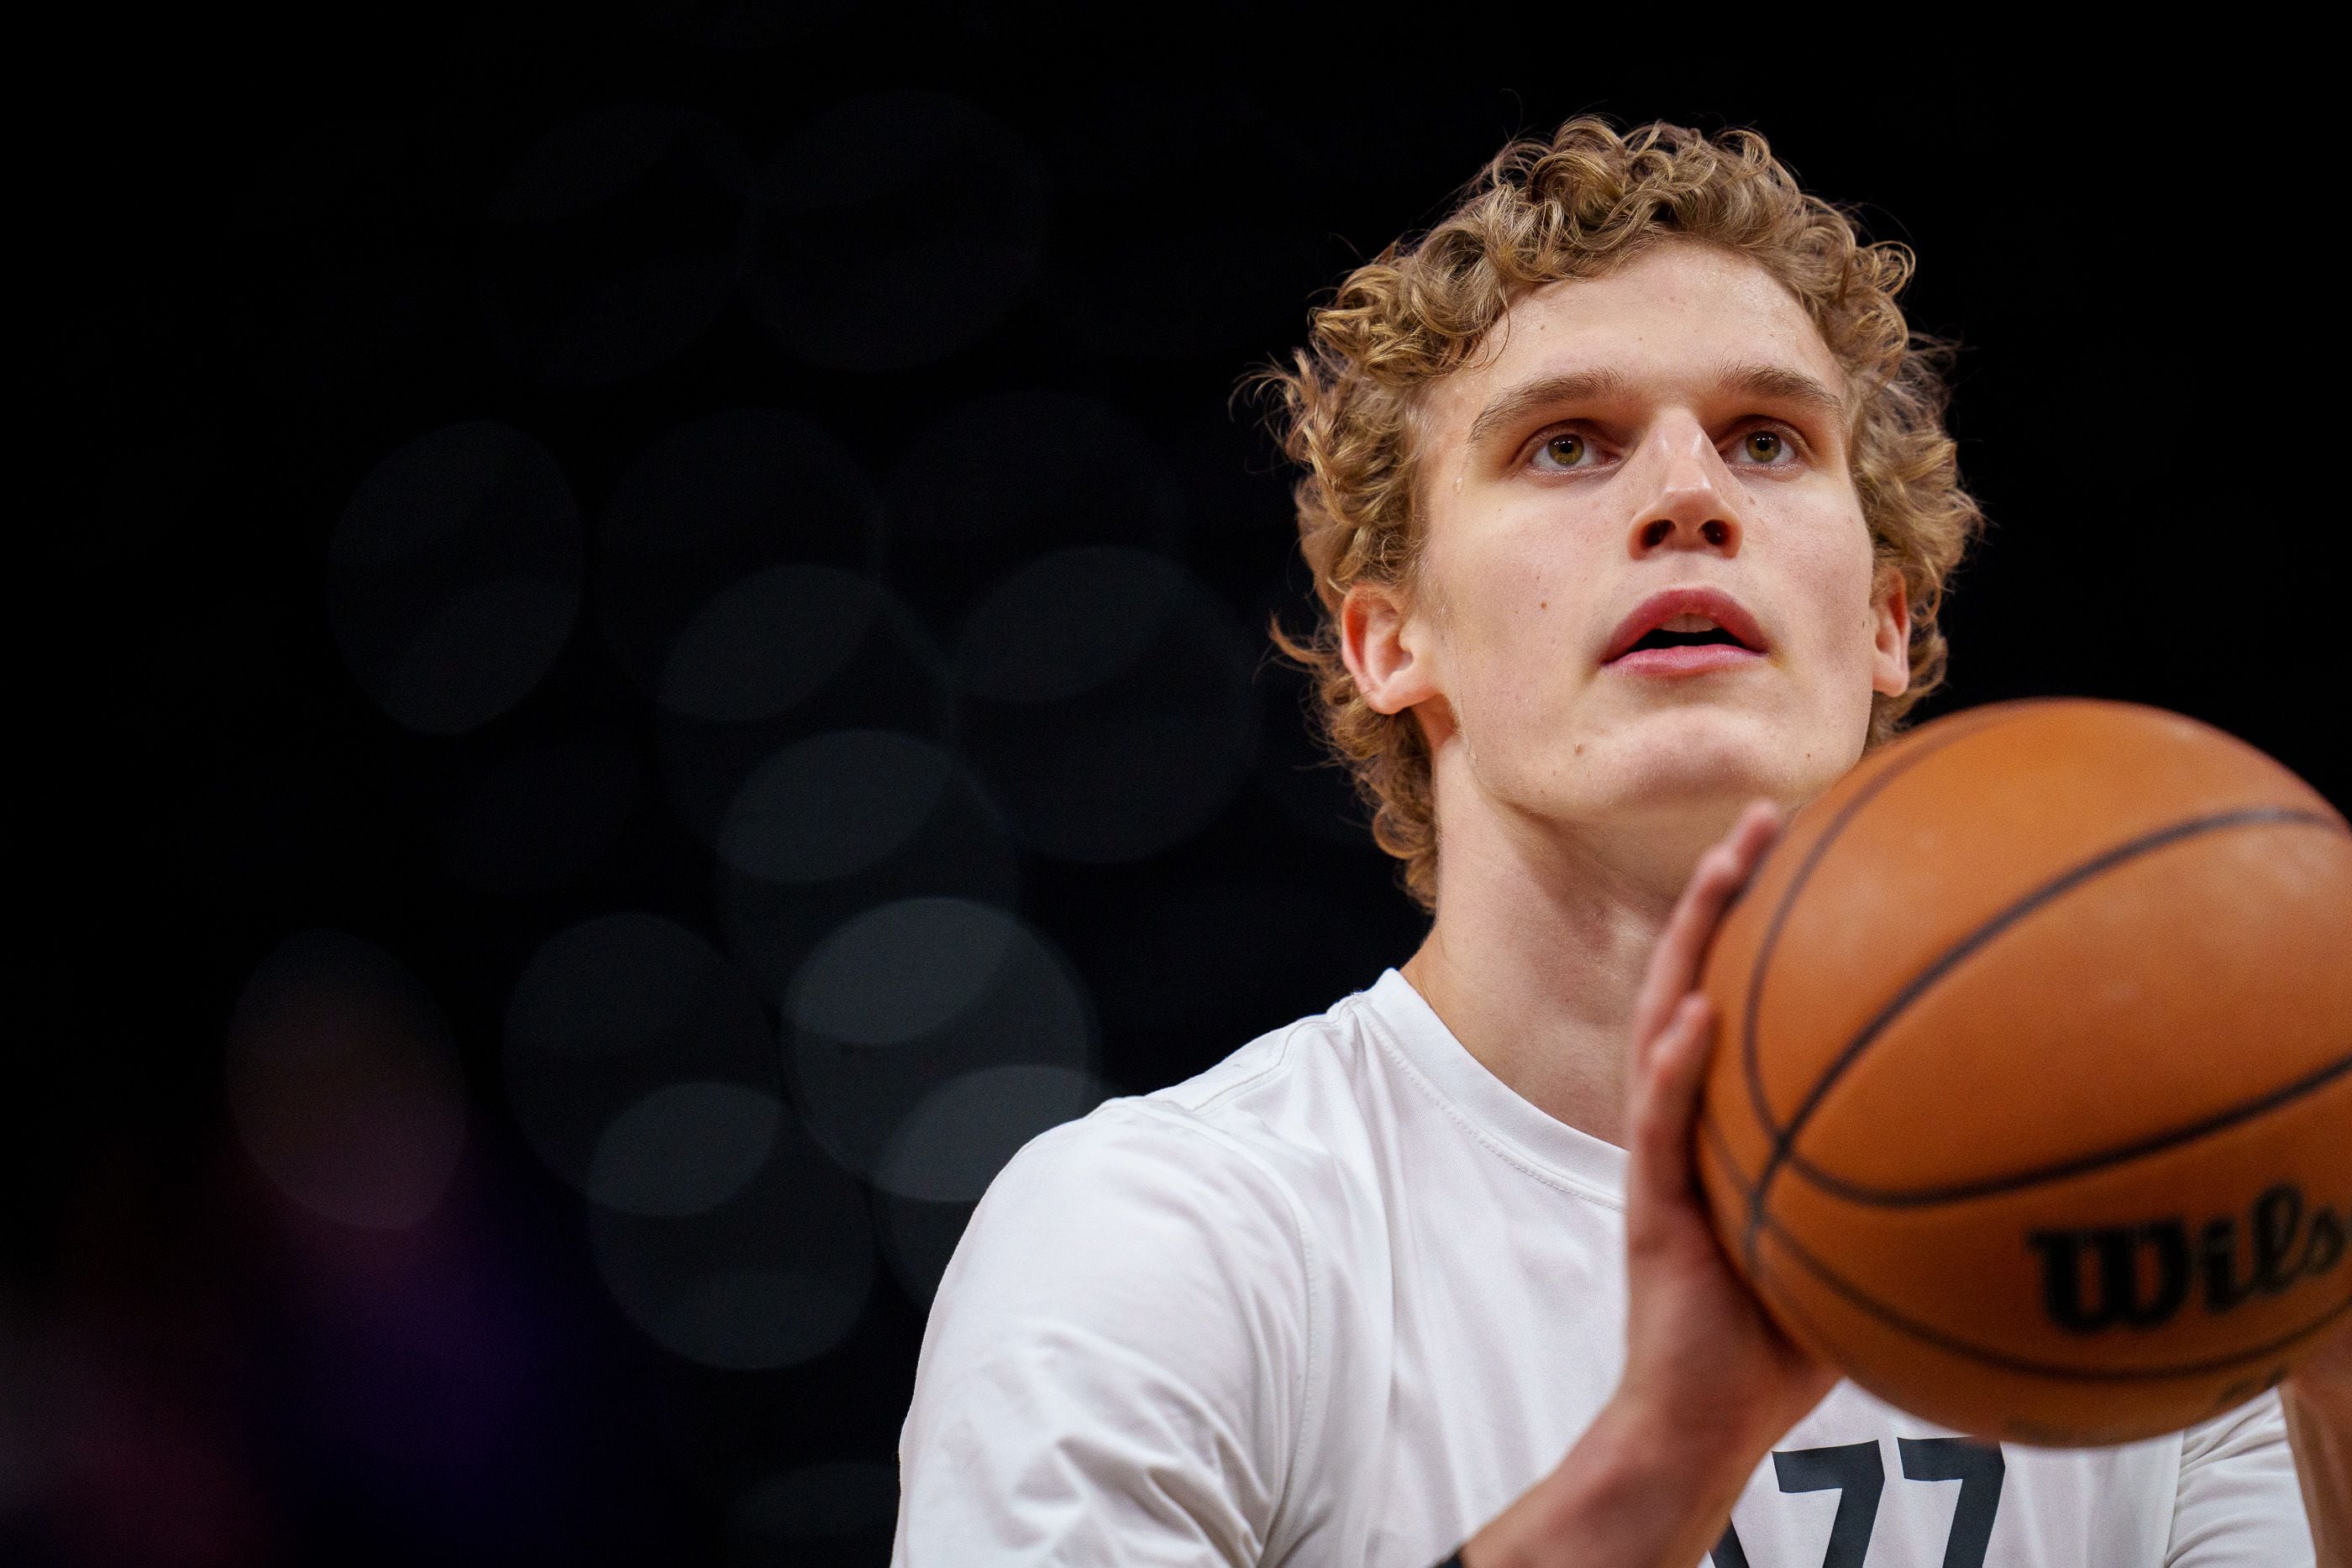 How the Utah Jazz's Lauri Markkanen turned himself into an NBA All-Star  (with some help)